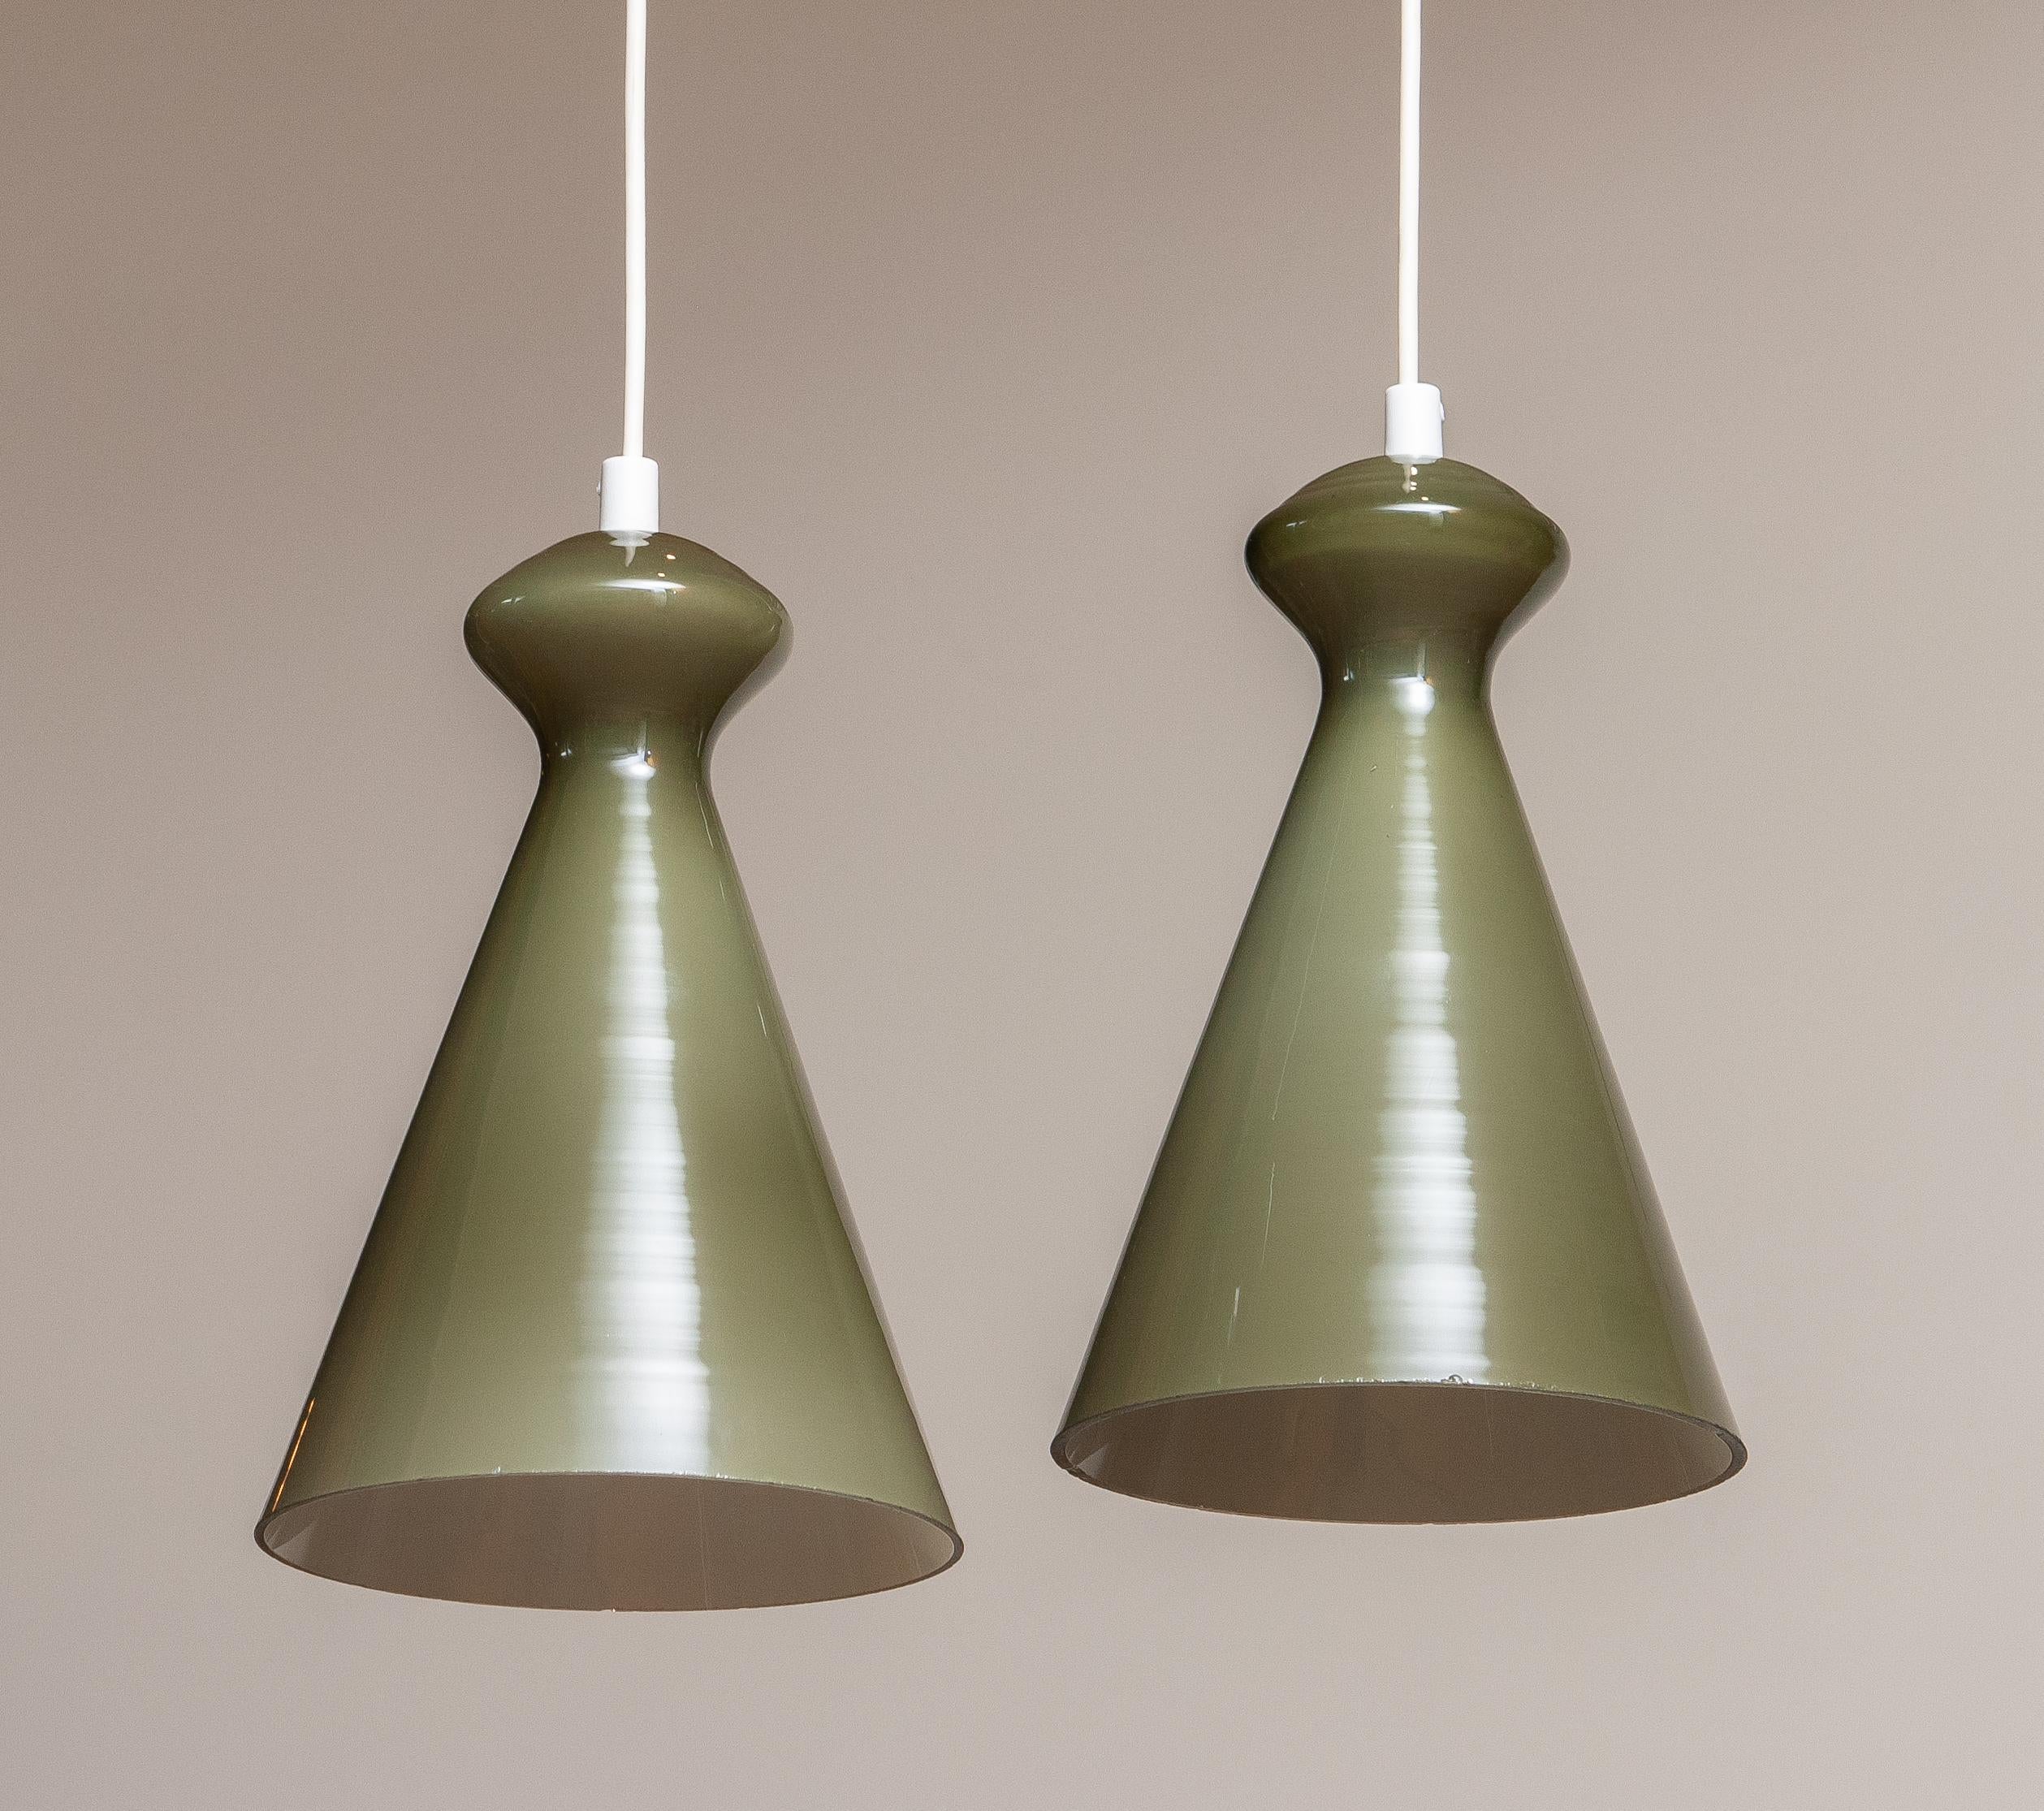 1950 Pair Glass Pendants in Olive Green by Maria Lindeman for Idman Oy Finland 1